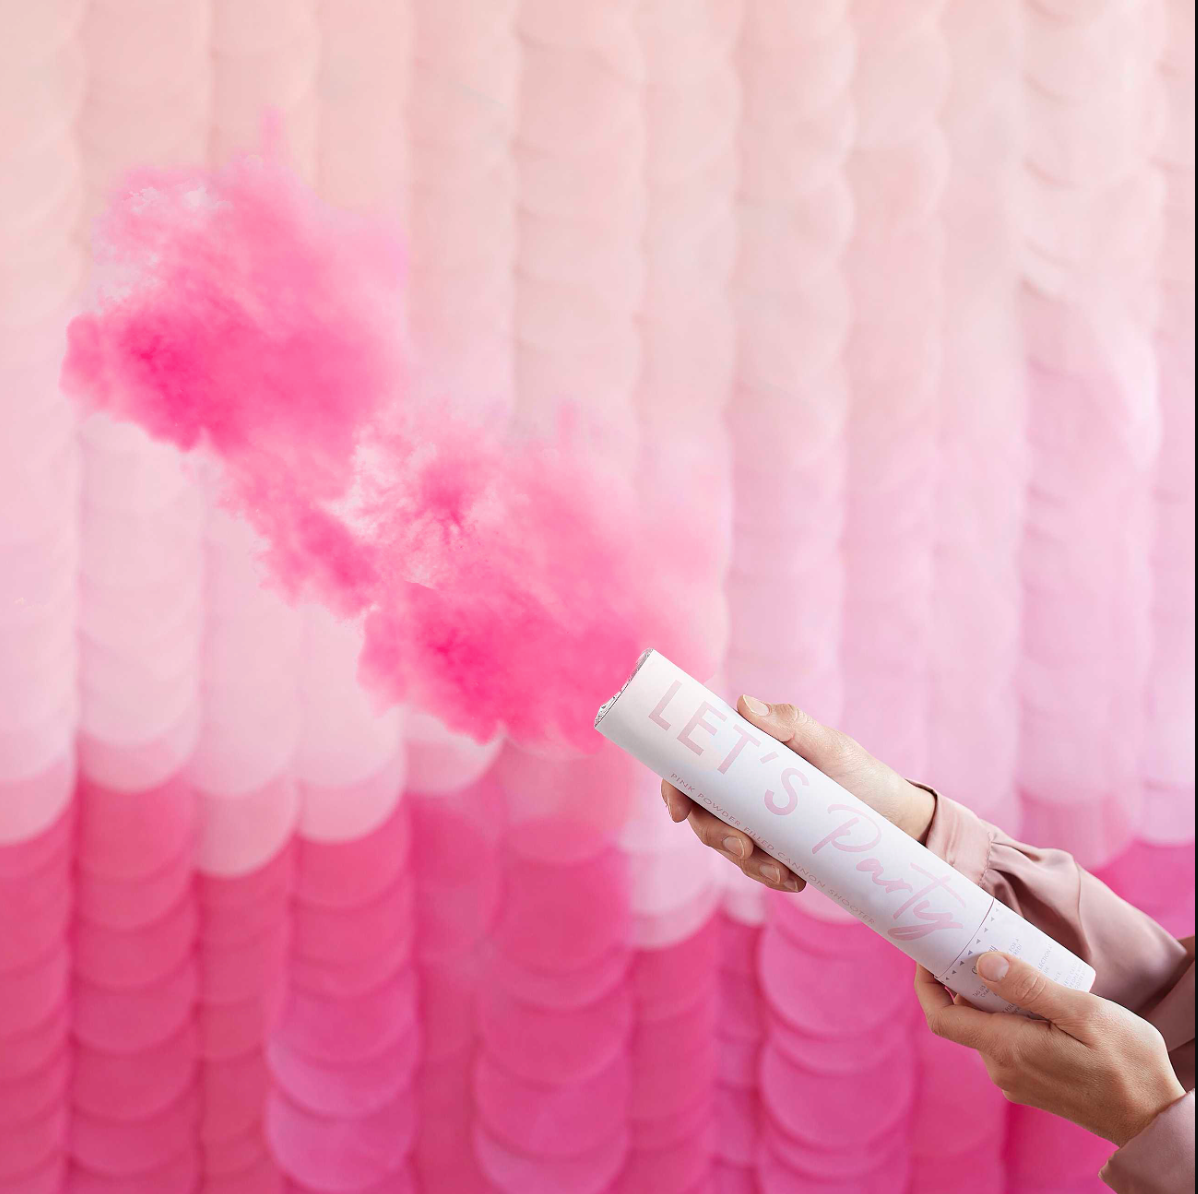 Pink Ombre Tissue Paper Disc Party Backdrop